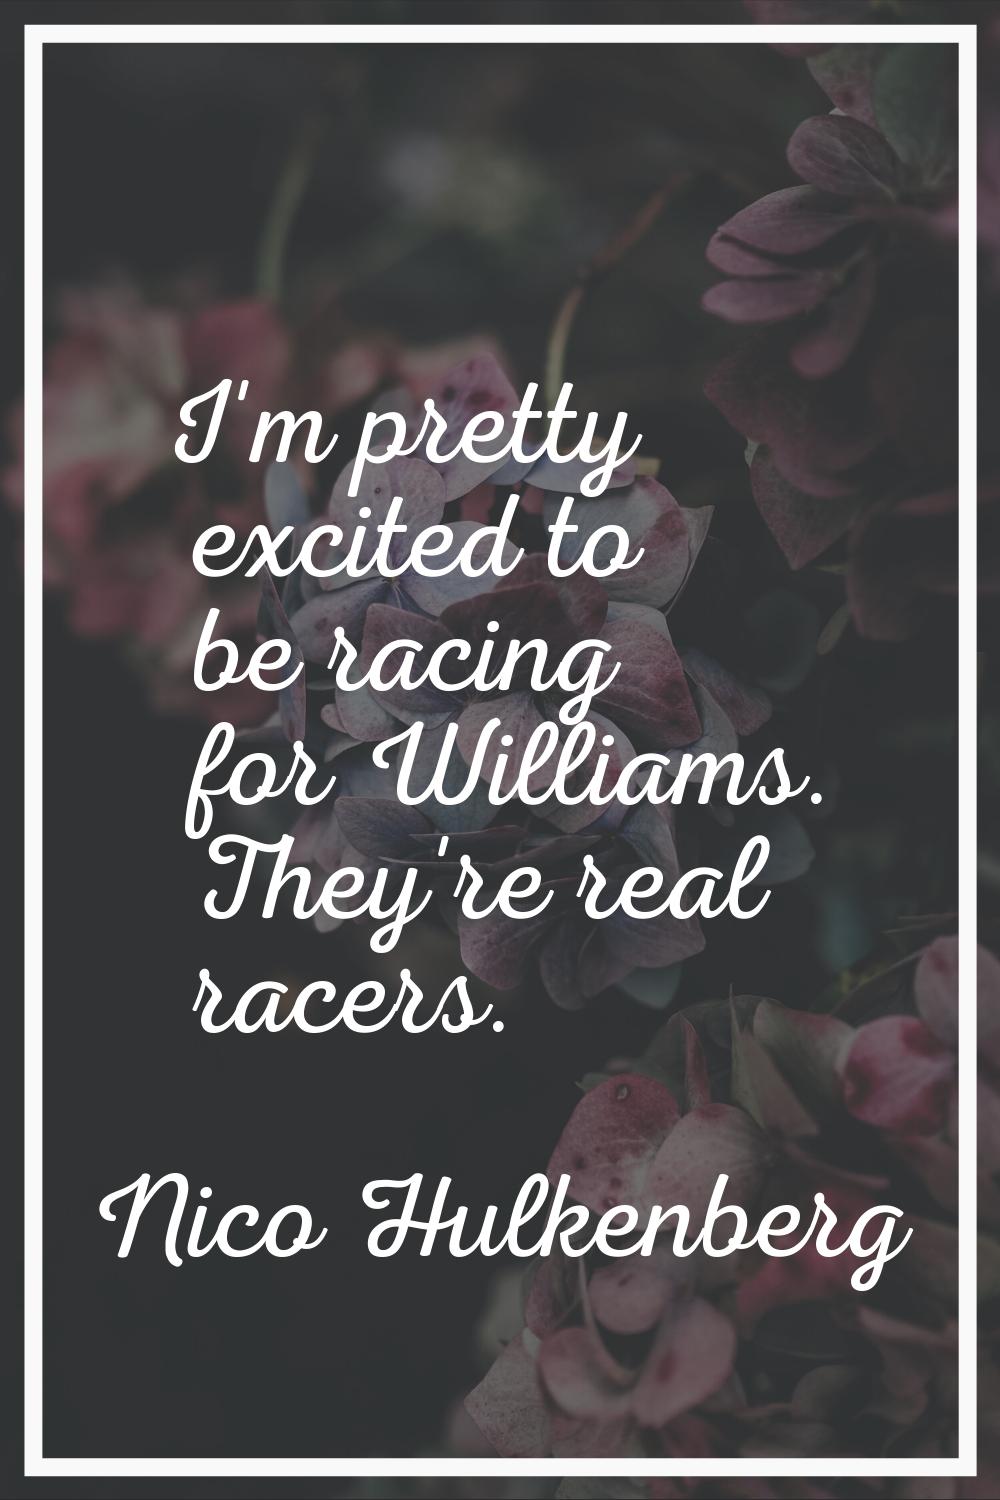 I'm pretty excited to be racing for Williams. They're real racers.